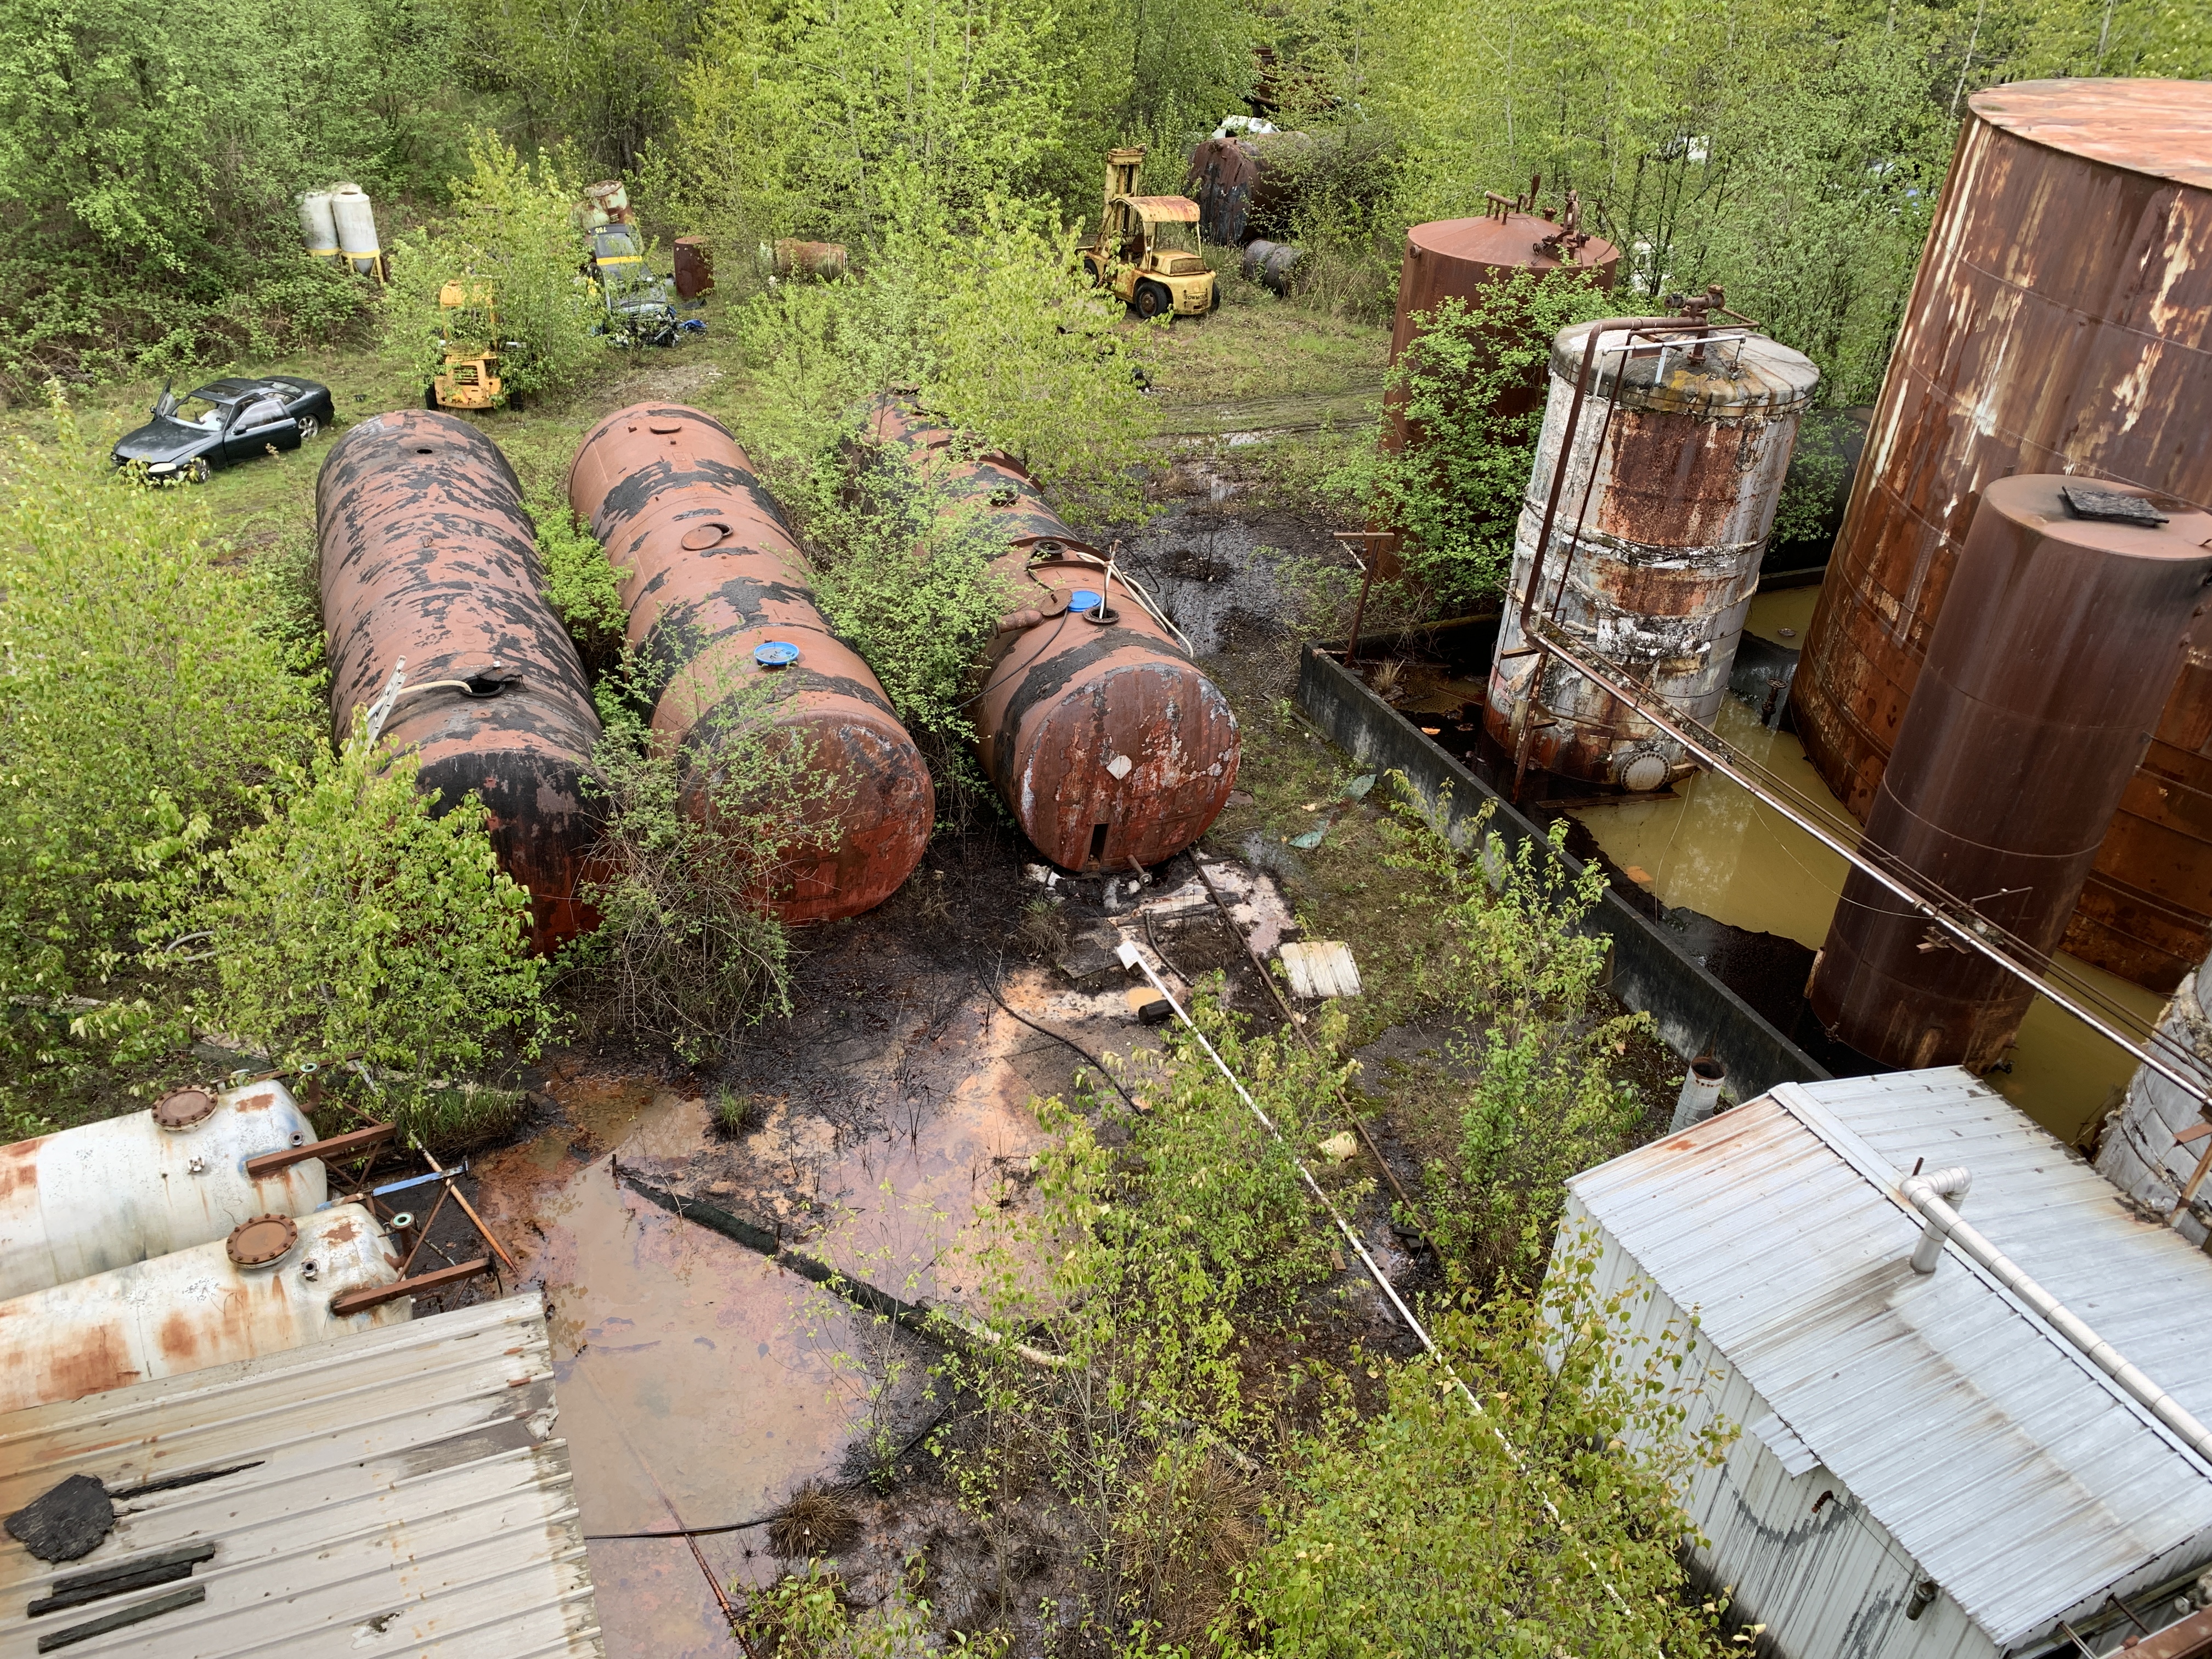 Looking down on large horizontal cylindrical tanks in center of photo, with large vertical tanks to the right. Liquid with rusty streaks has pooled underneath the tanks. 